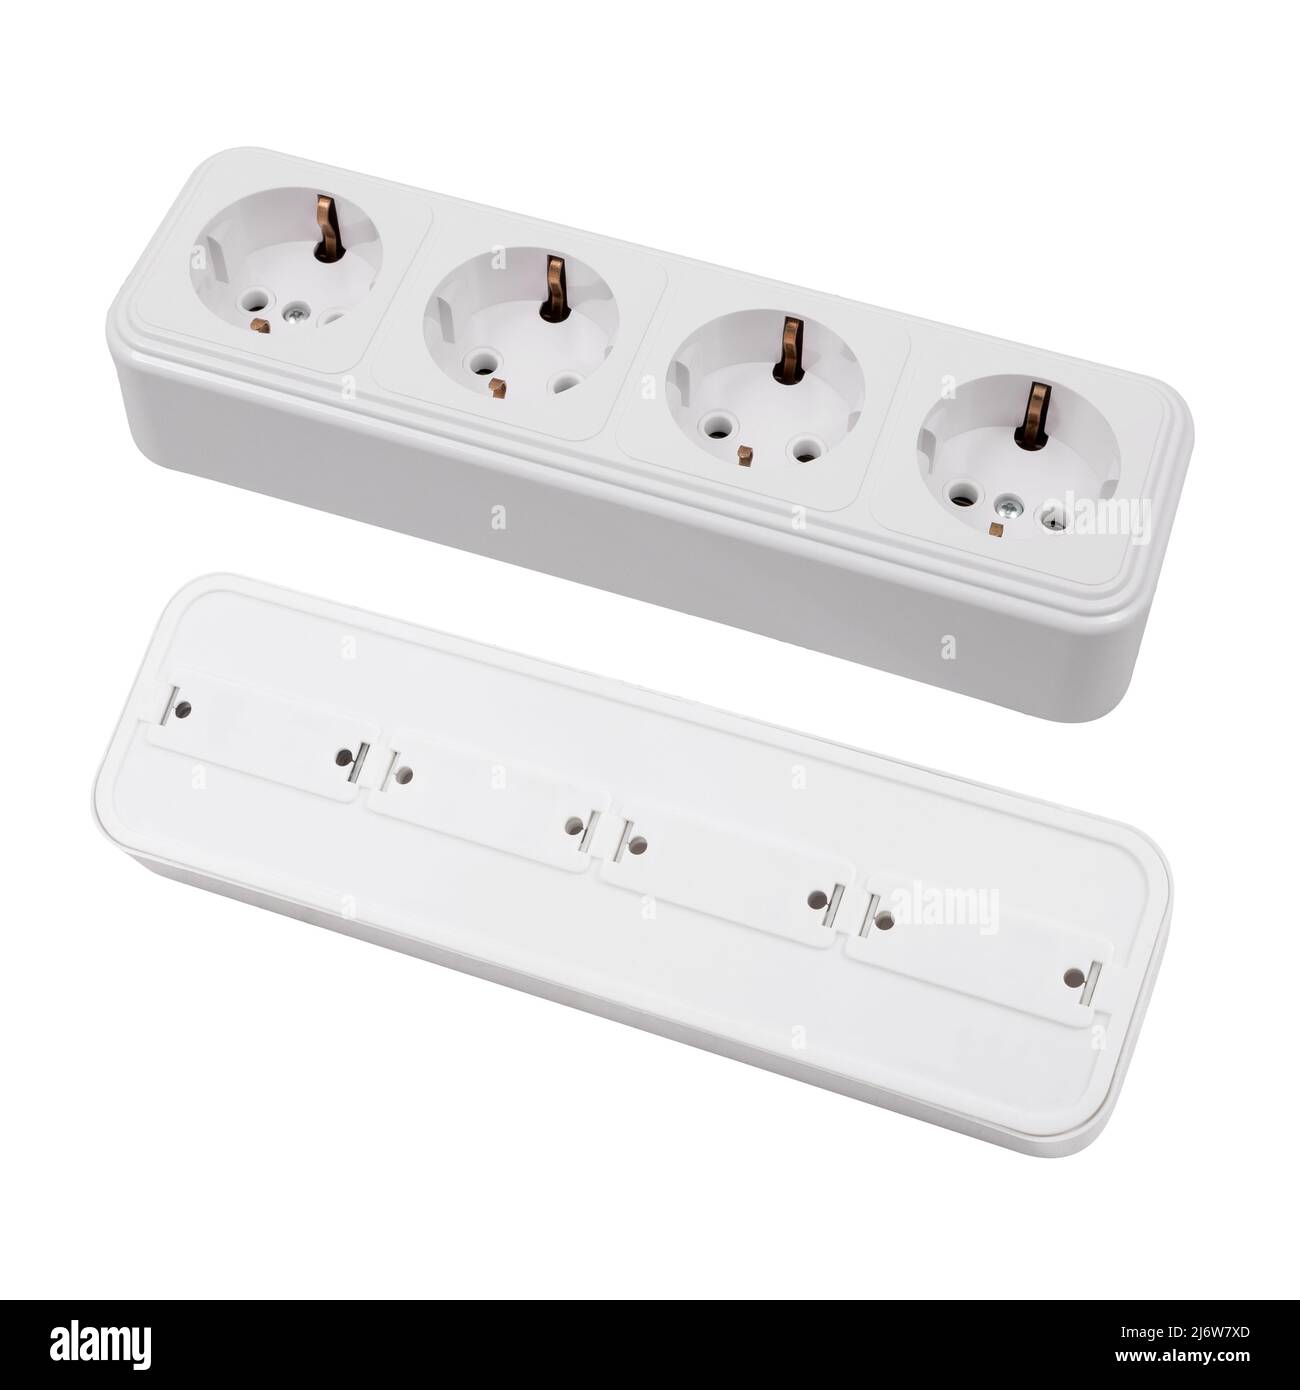 Overhead socket for 4 connectors isolated on a white background. Two angles: front and back. Stock Photo